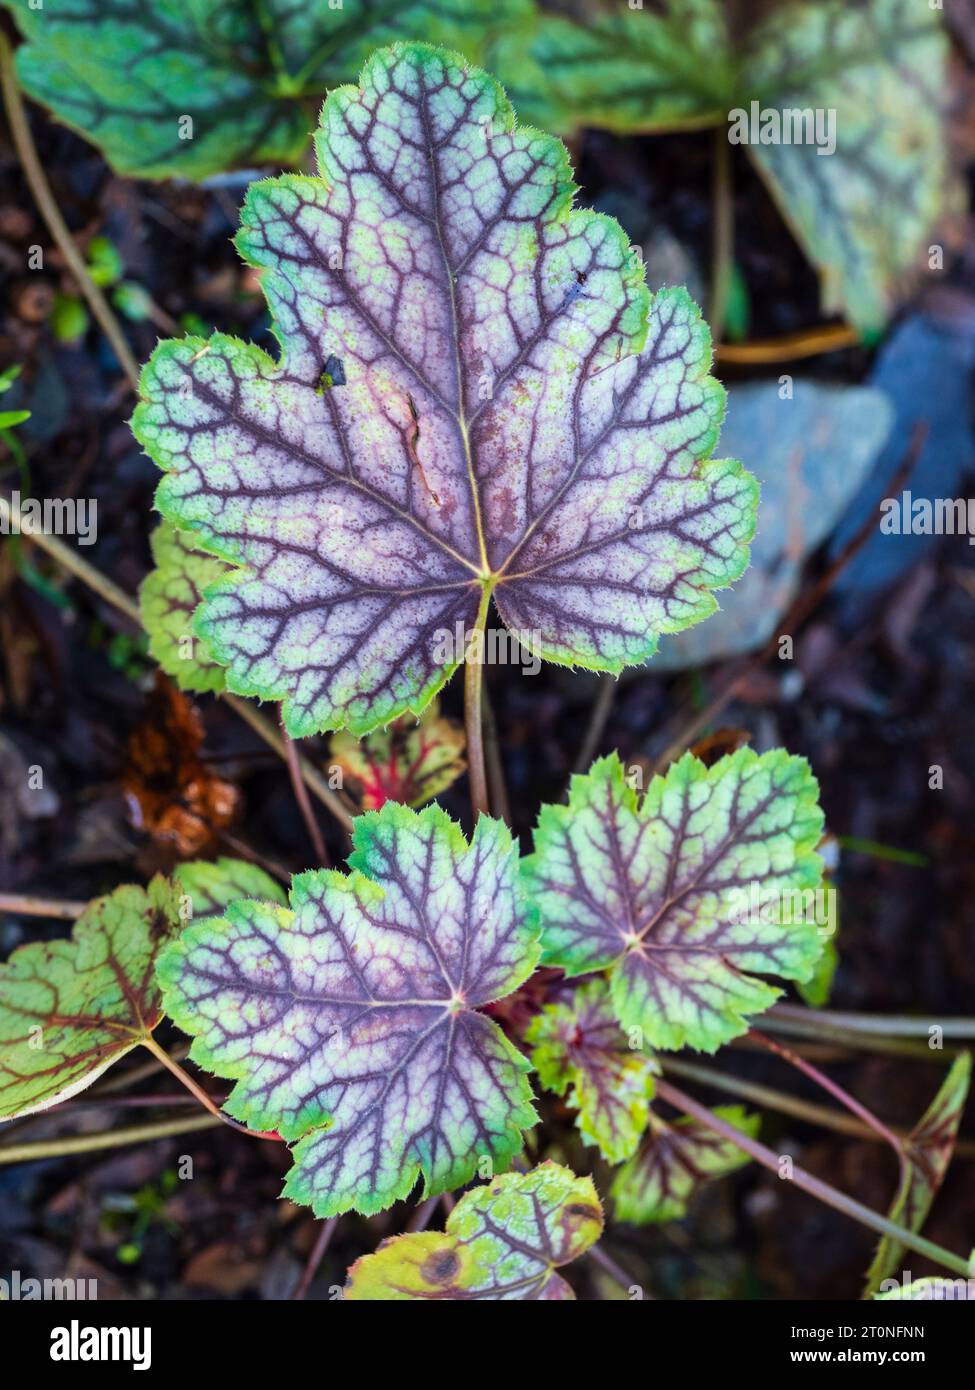 Colourful leaves of the hardy perennial evergree garden plant, Heucherella 'Dayglow Pink' Stock Photo